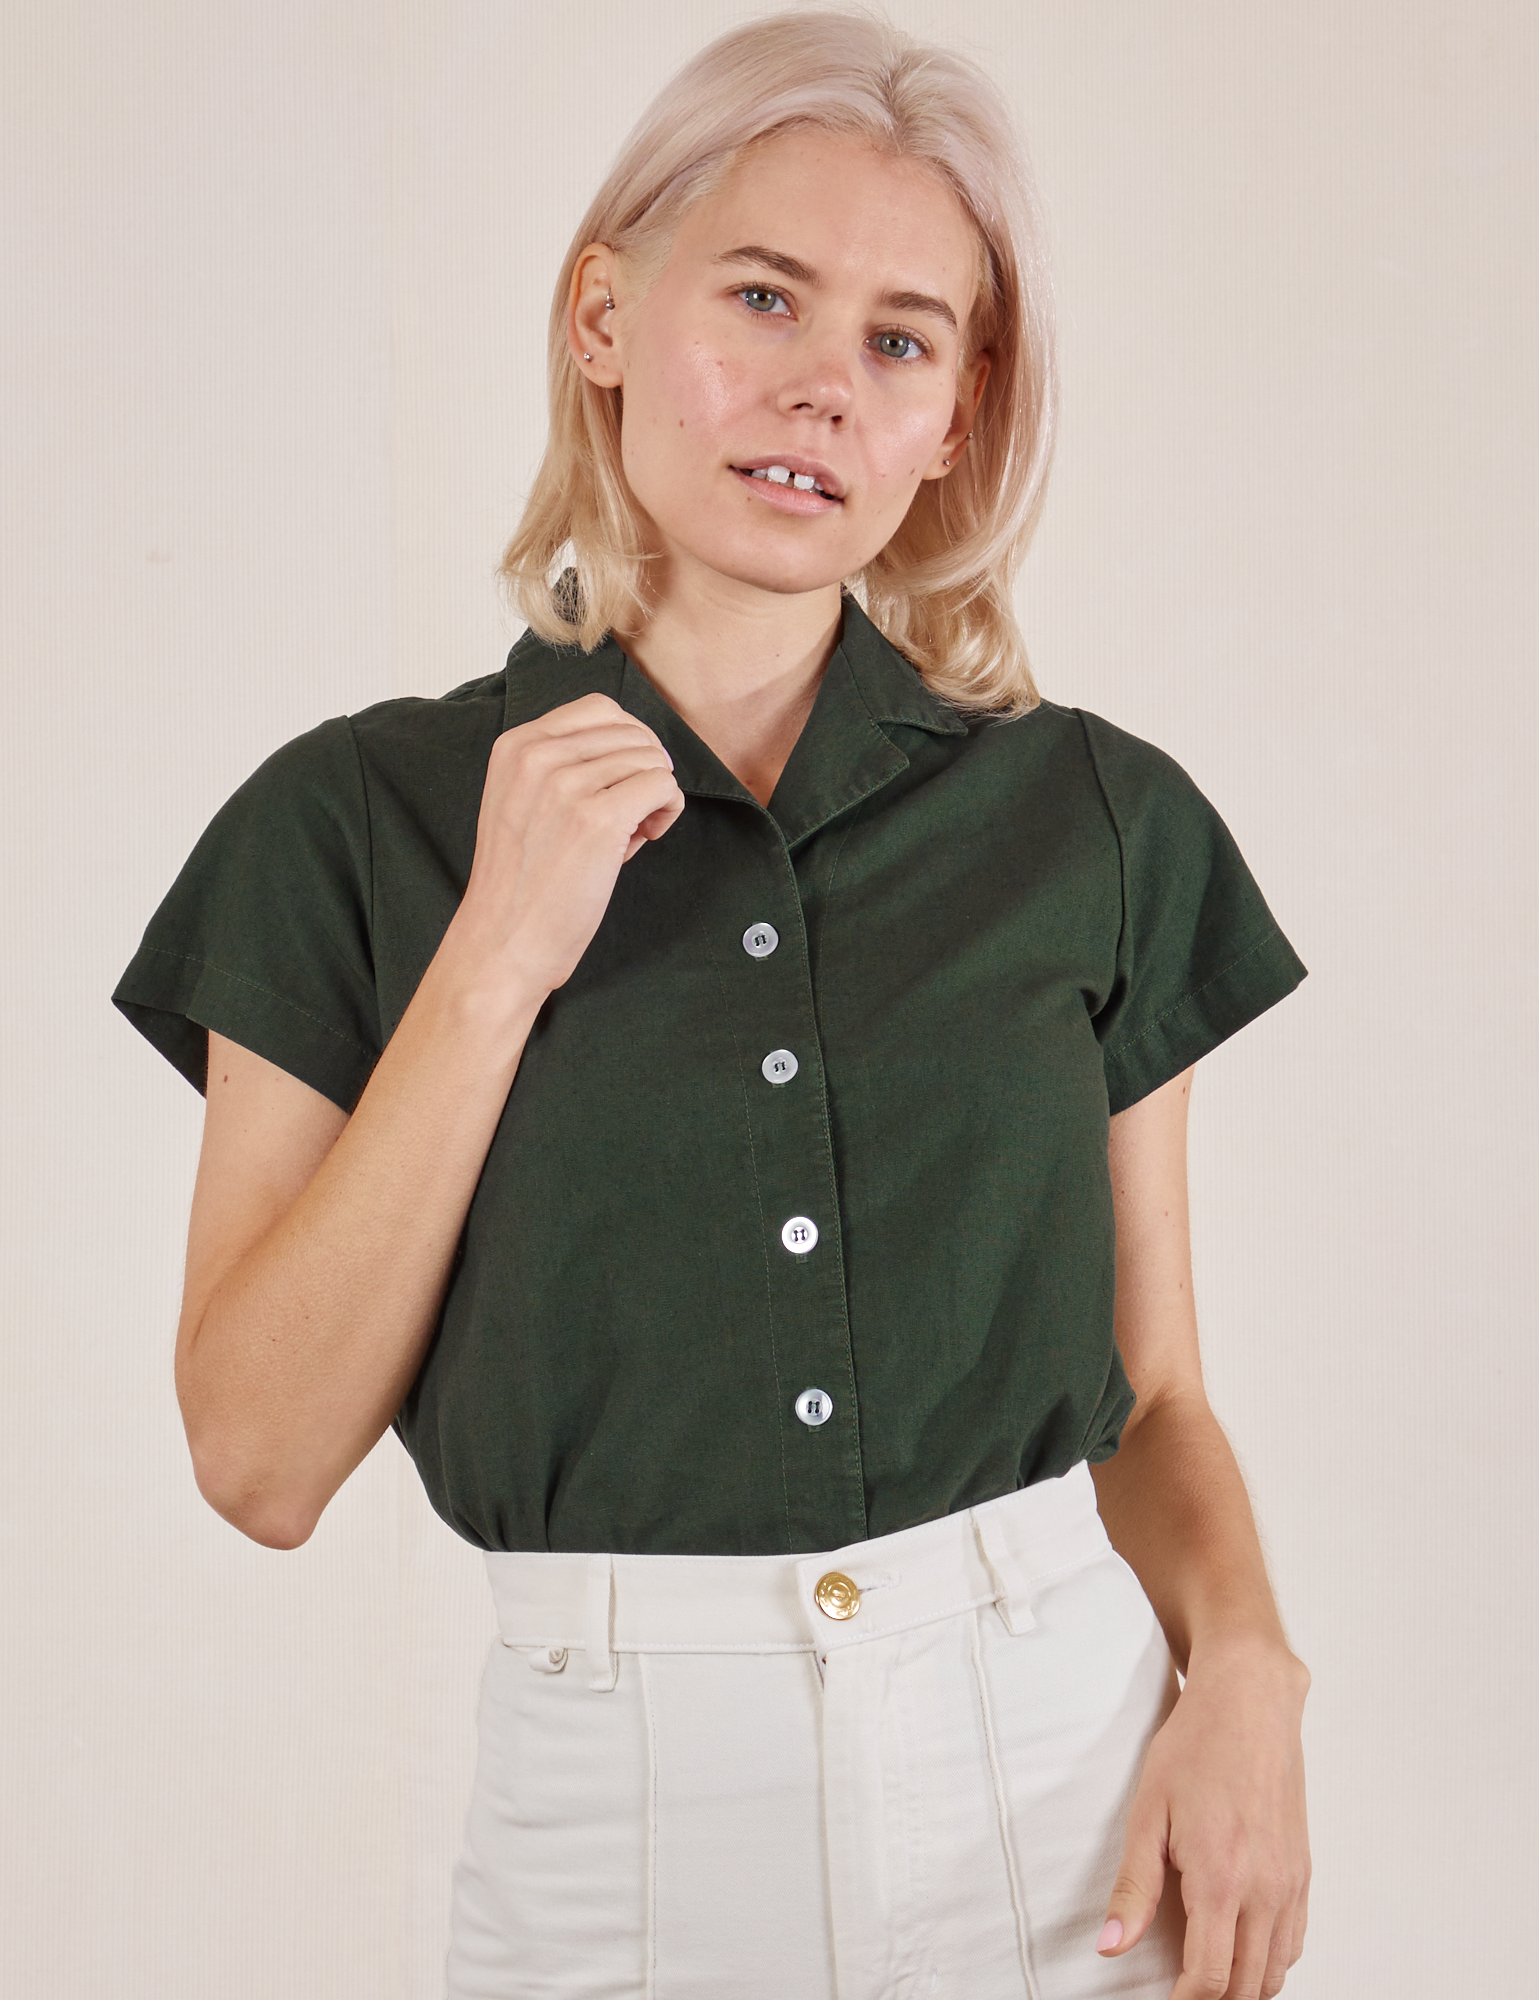 Madeline is wearing Pantry Button-Up in Swamp Green